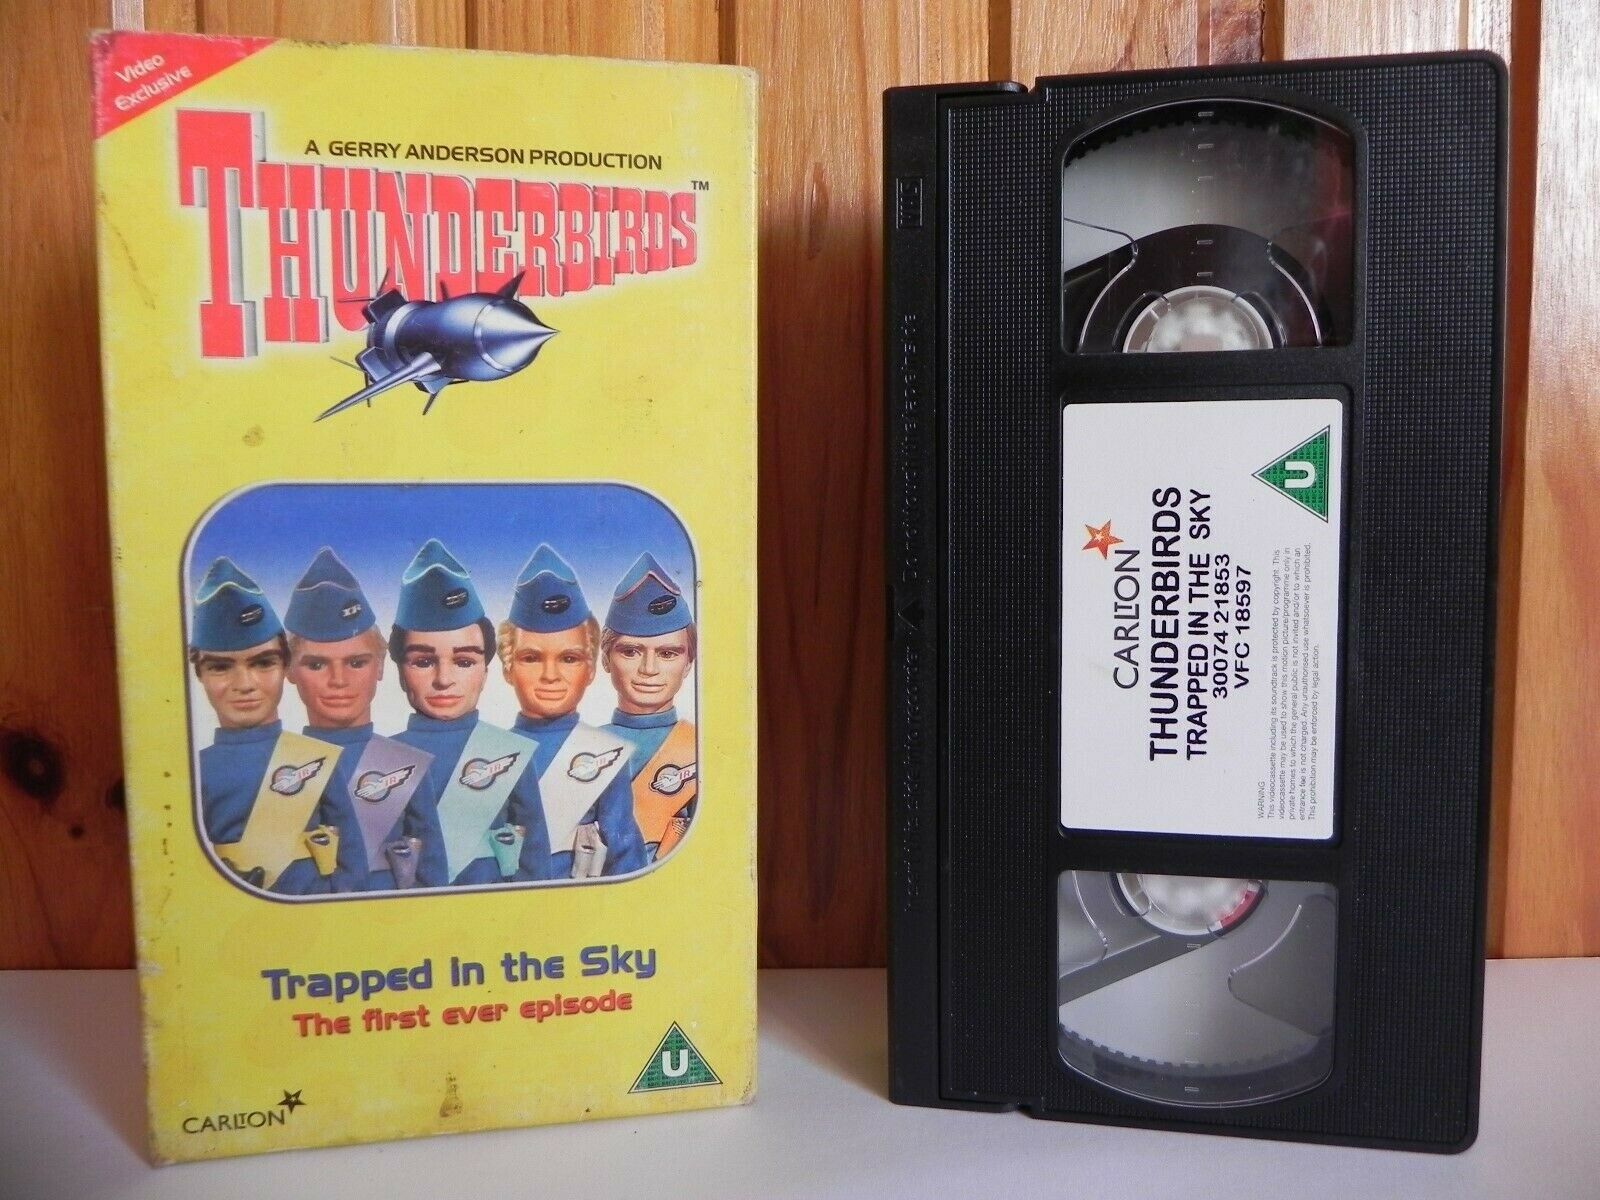 Thunderbirds: Trapped In The Sky - First Ever Episode - Animated - Carton - VHS-